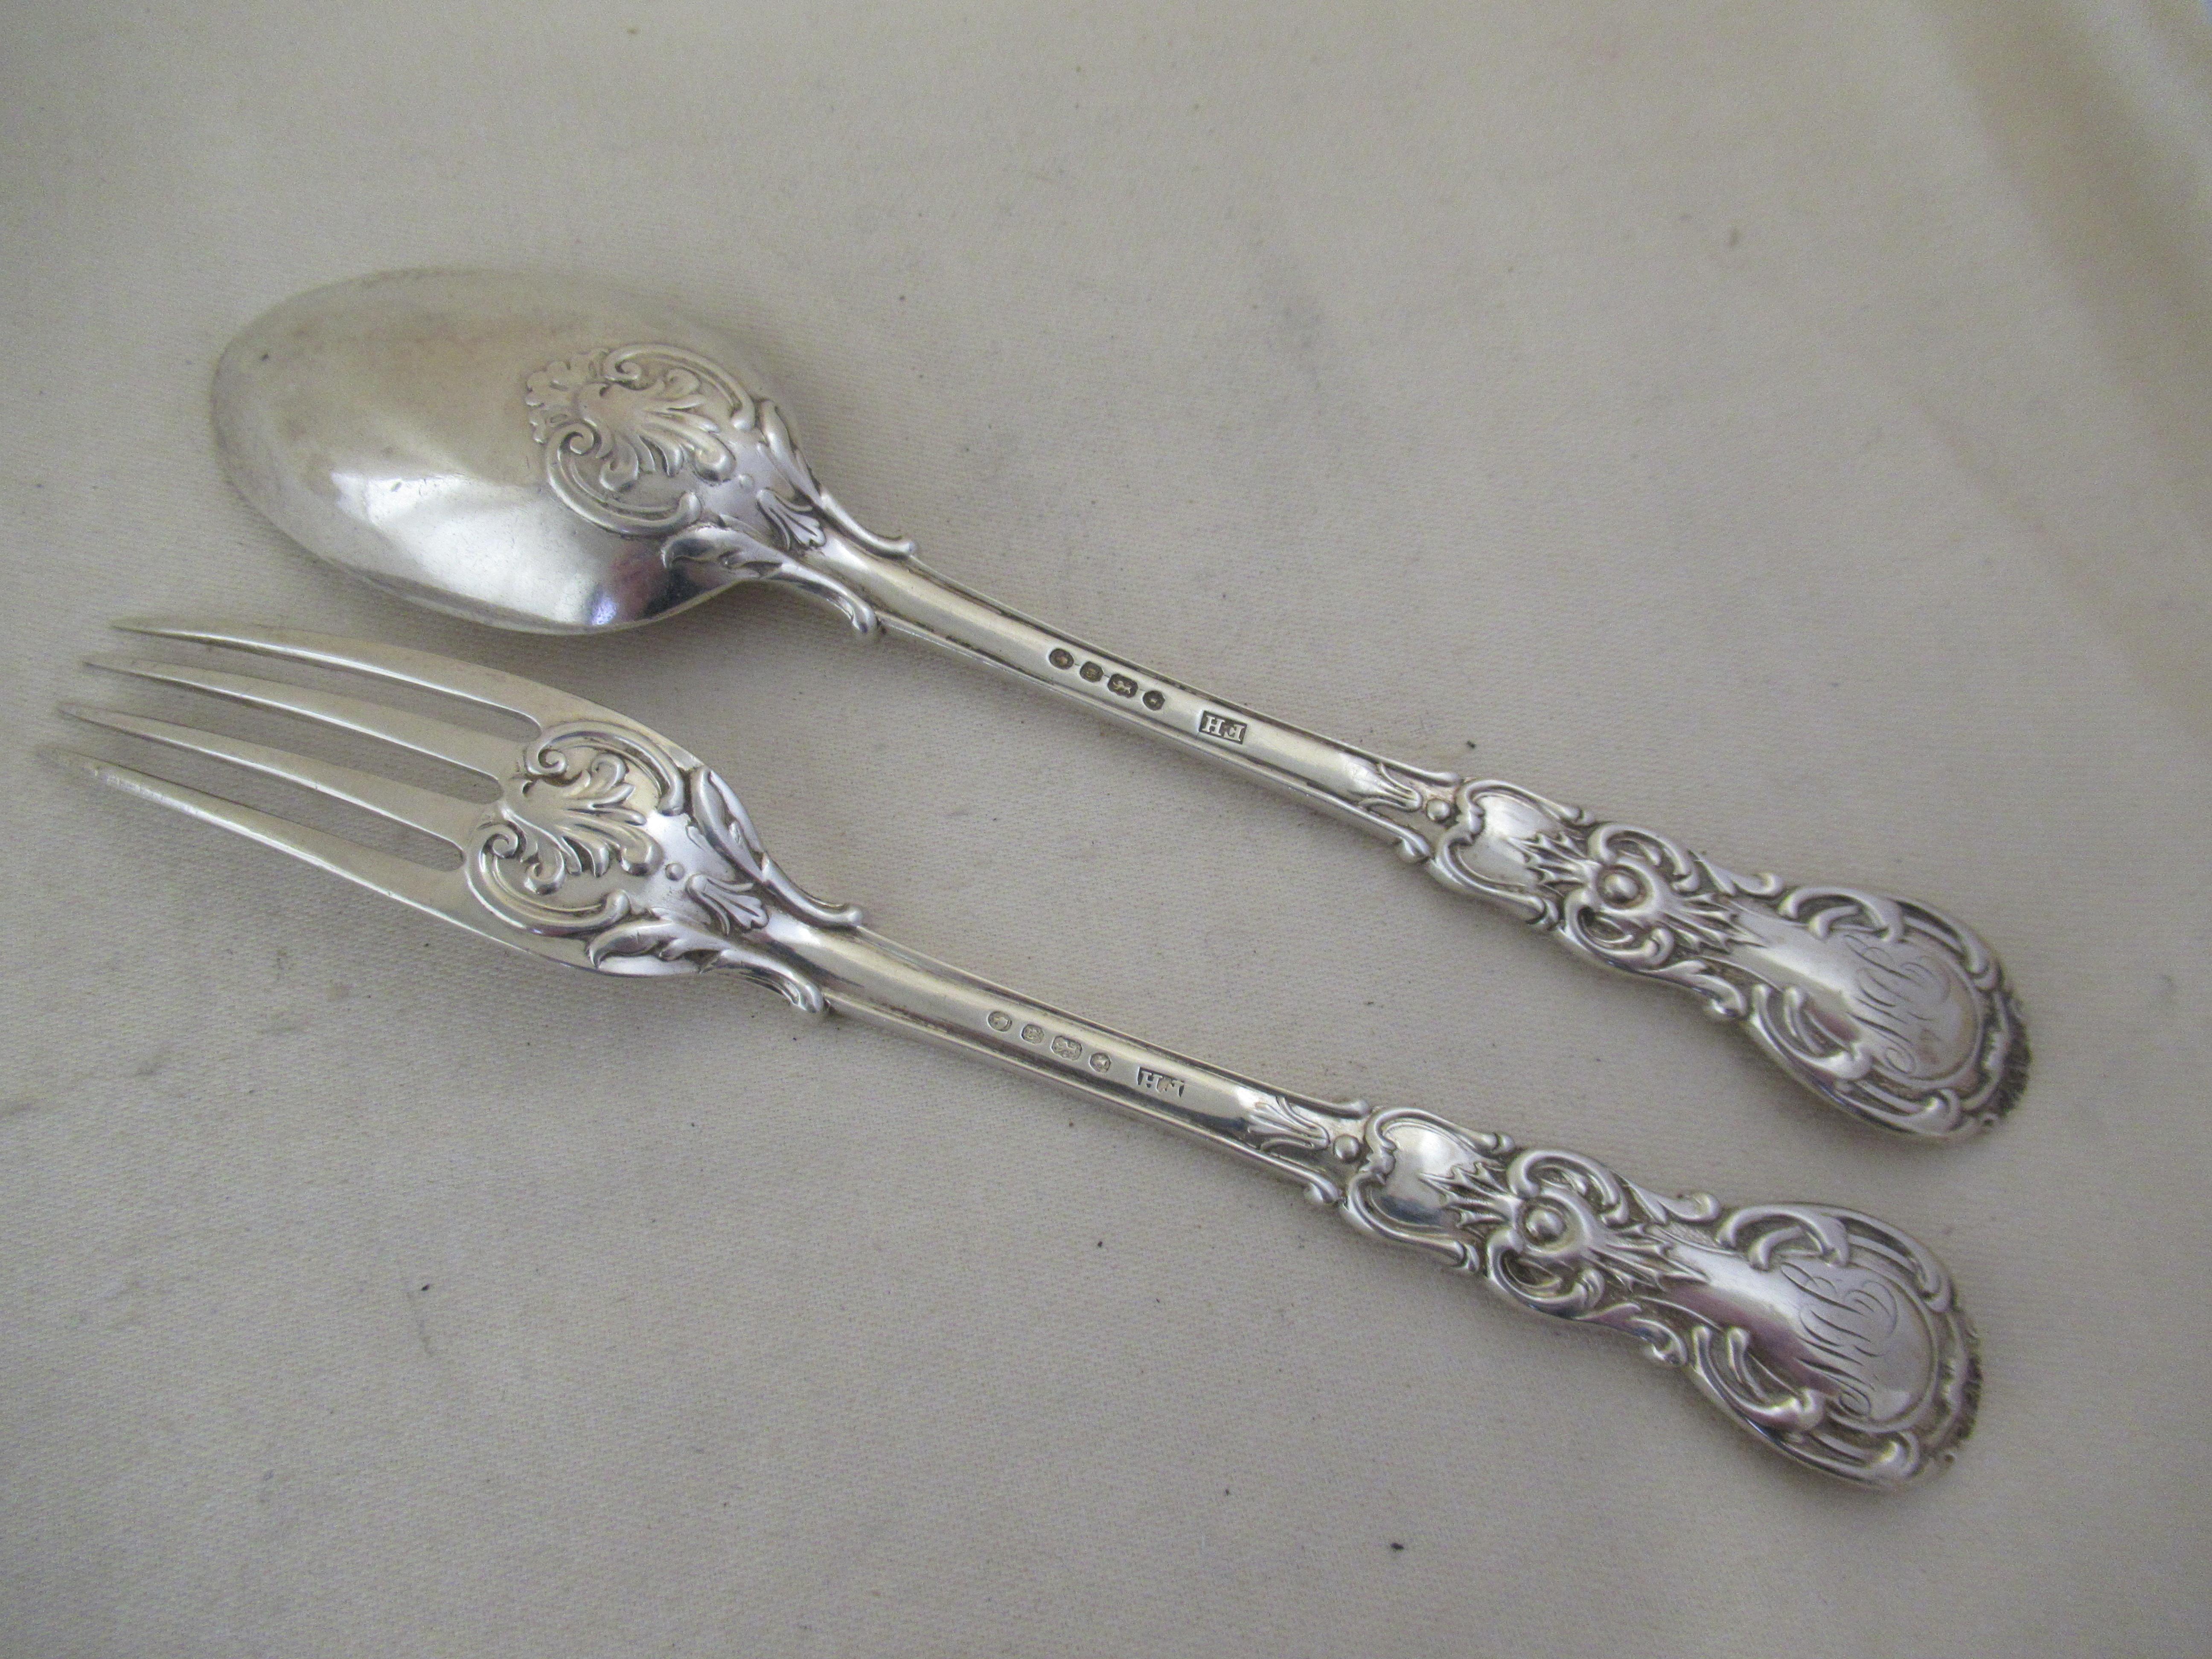 Hand-Crafted Sterling Silver Boxed Knife, Fork & Spoon Christening Set Hallmark, London, 1845